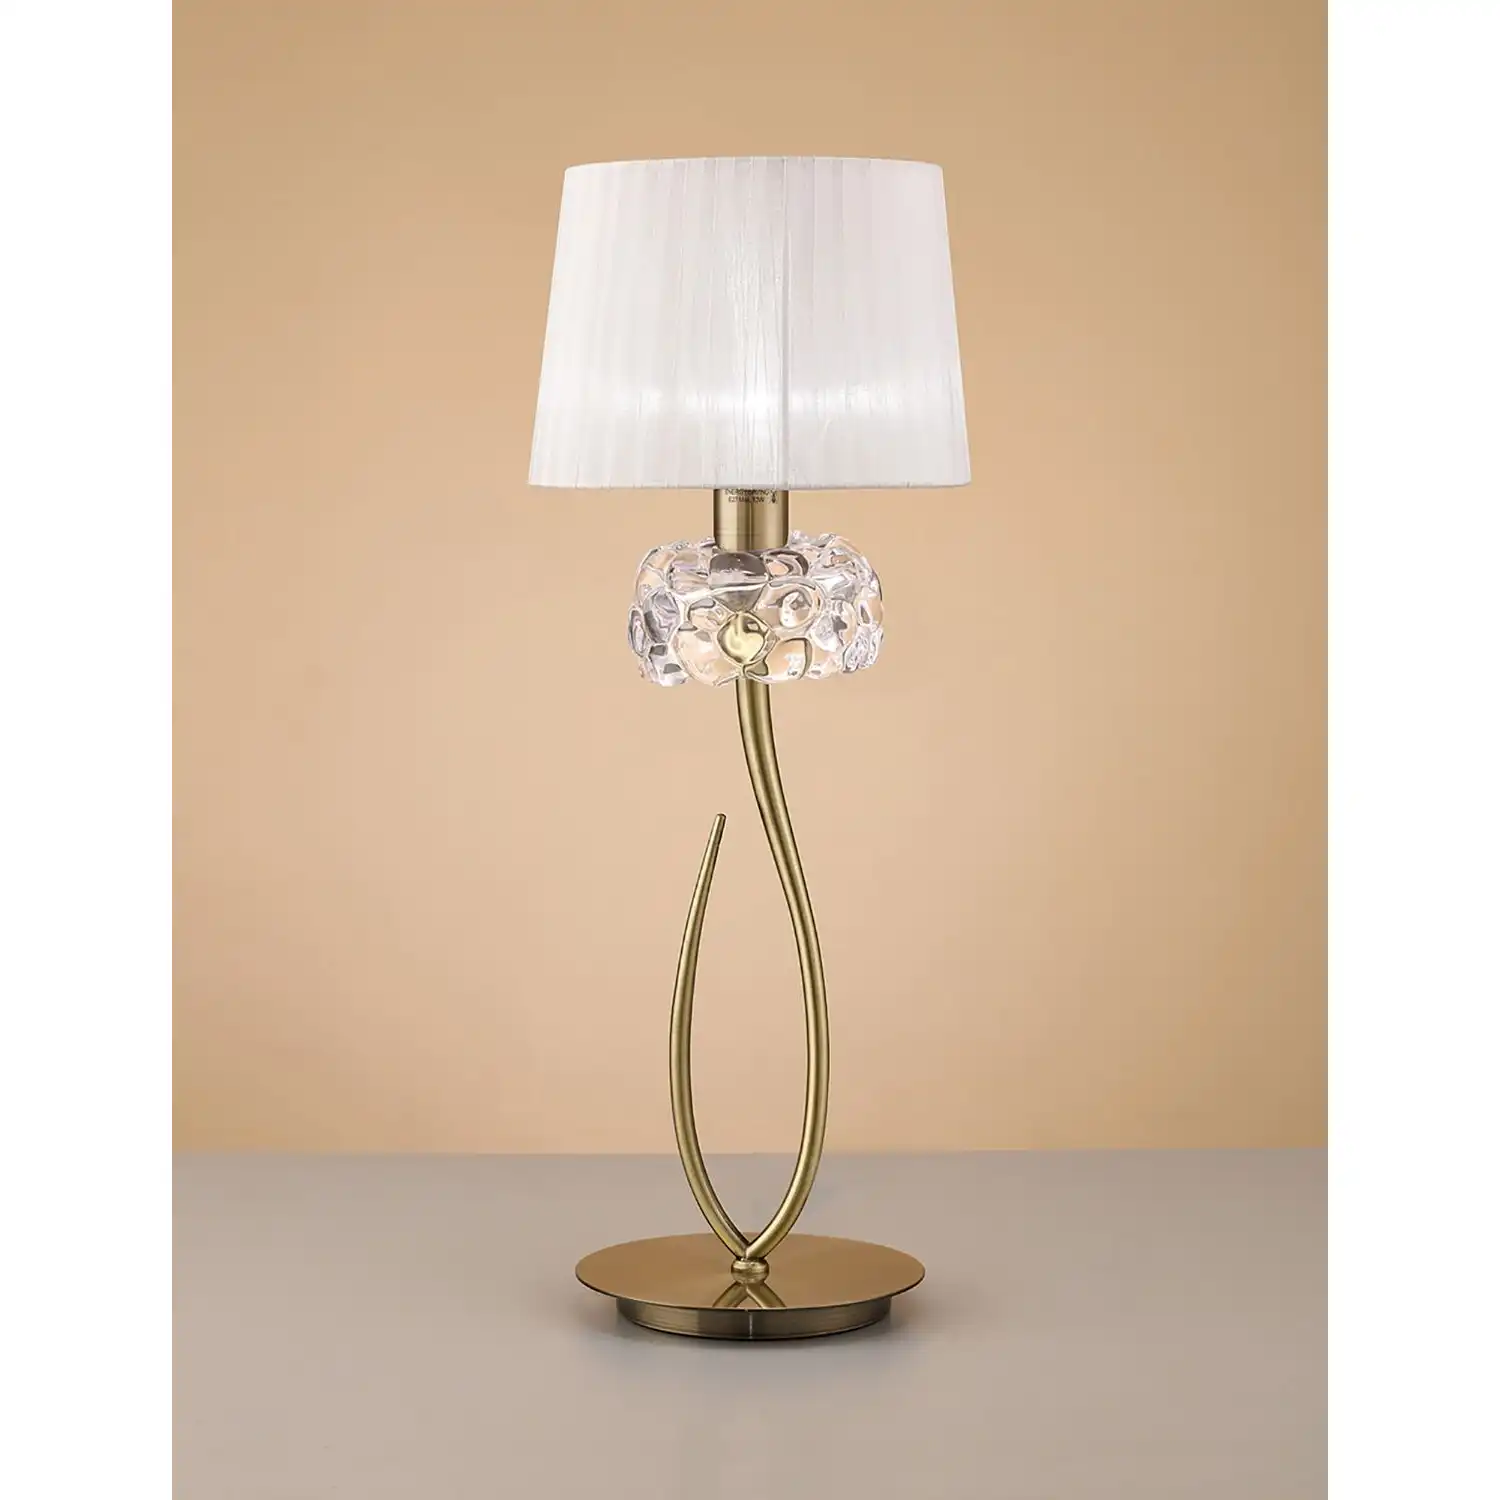 Loewe Table Lamp 1 Light E27 Large, Antique Brass With White Shade